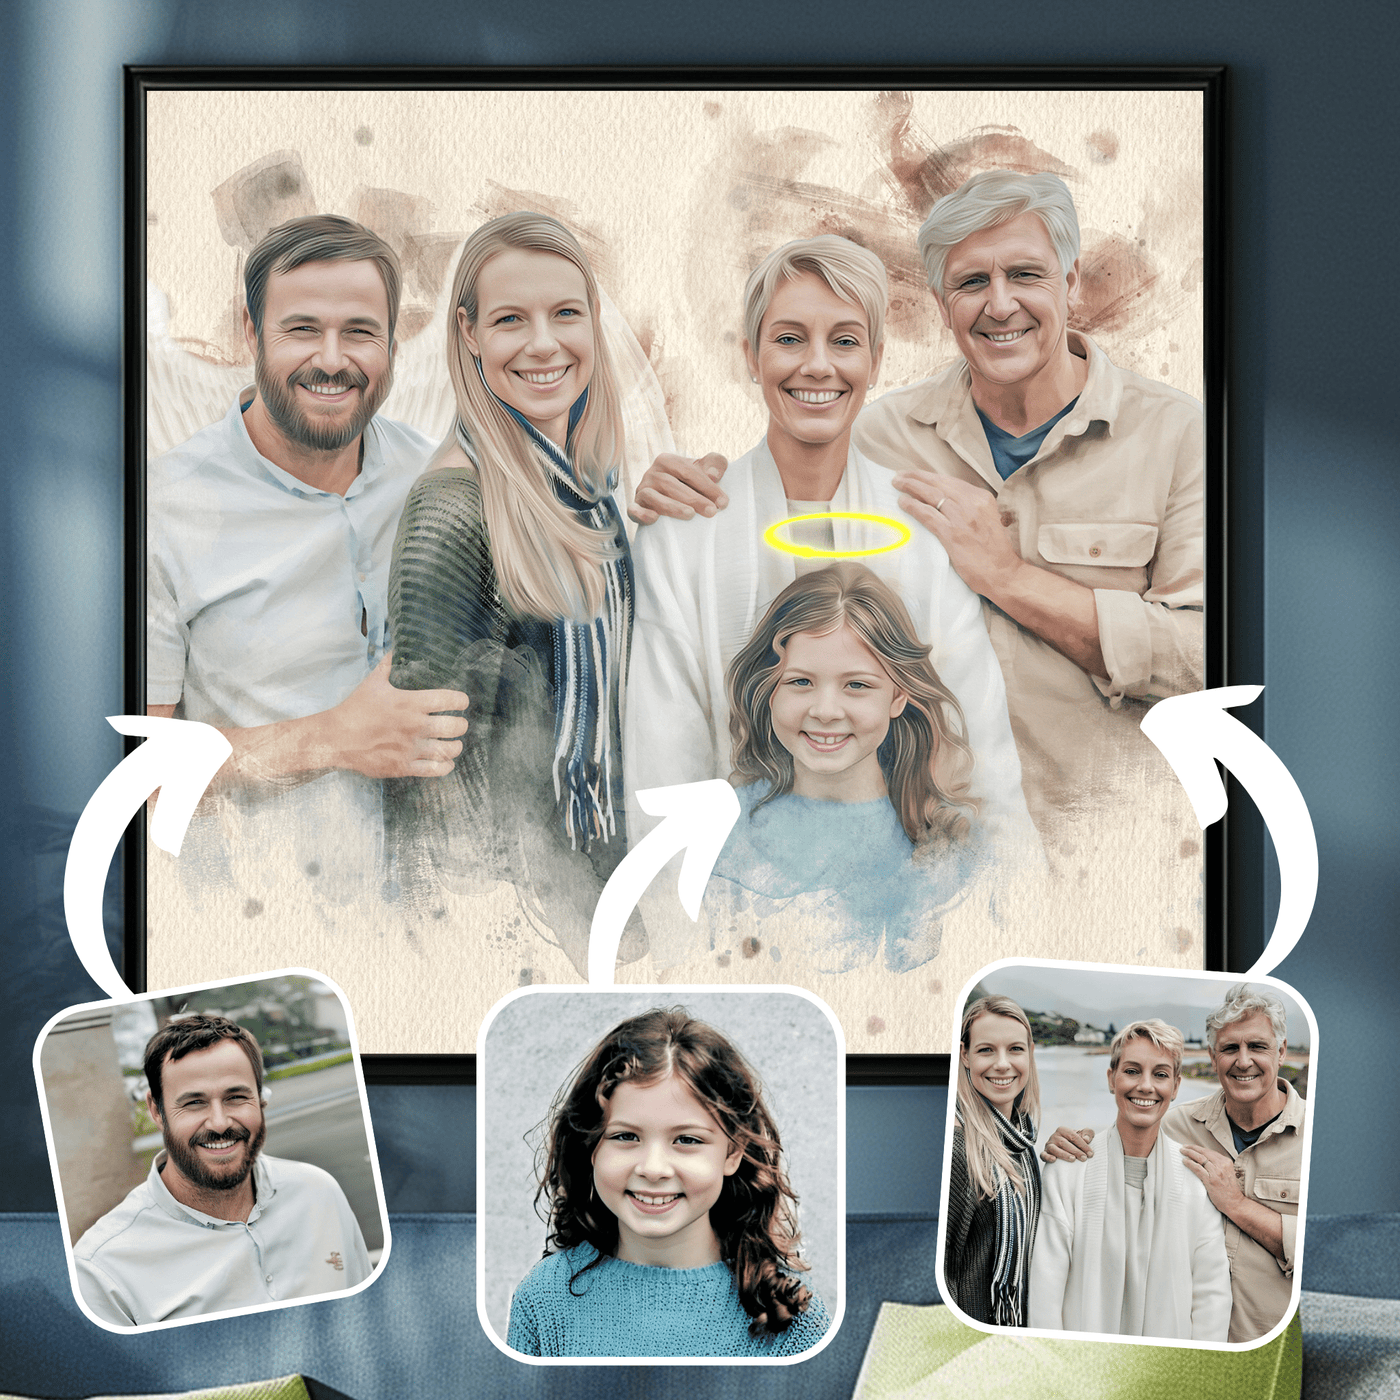 add deceased loved one to photo of a before and after photo tranformation of a family photo with their deceased love one's